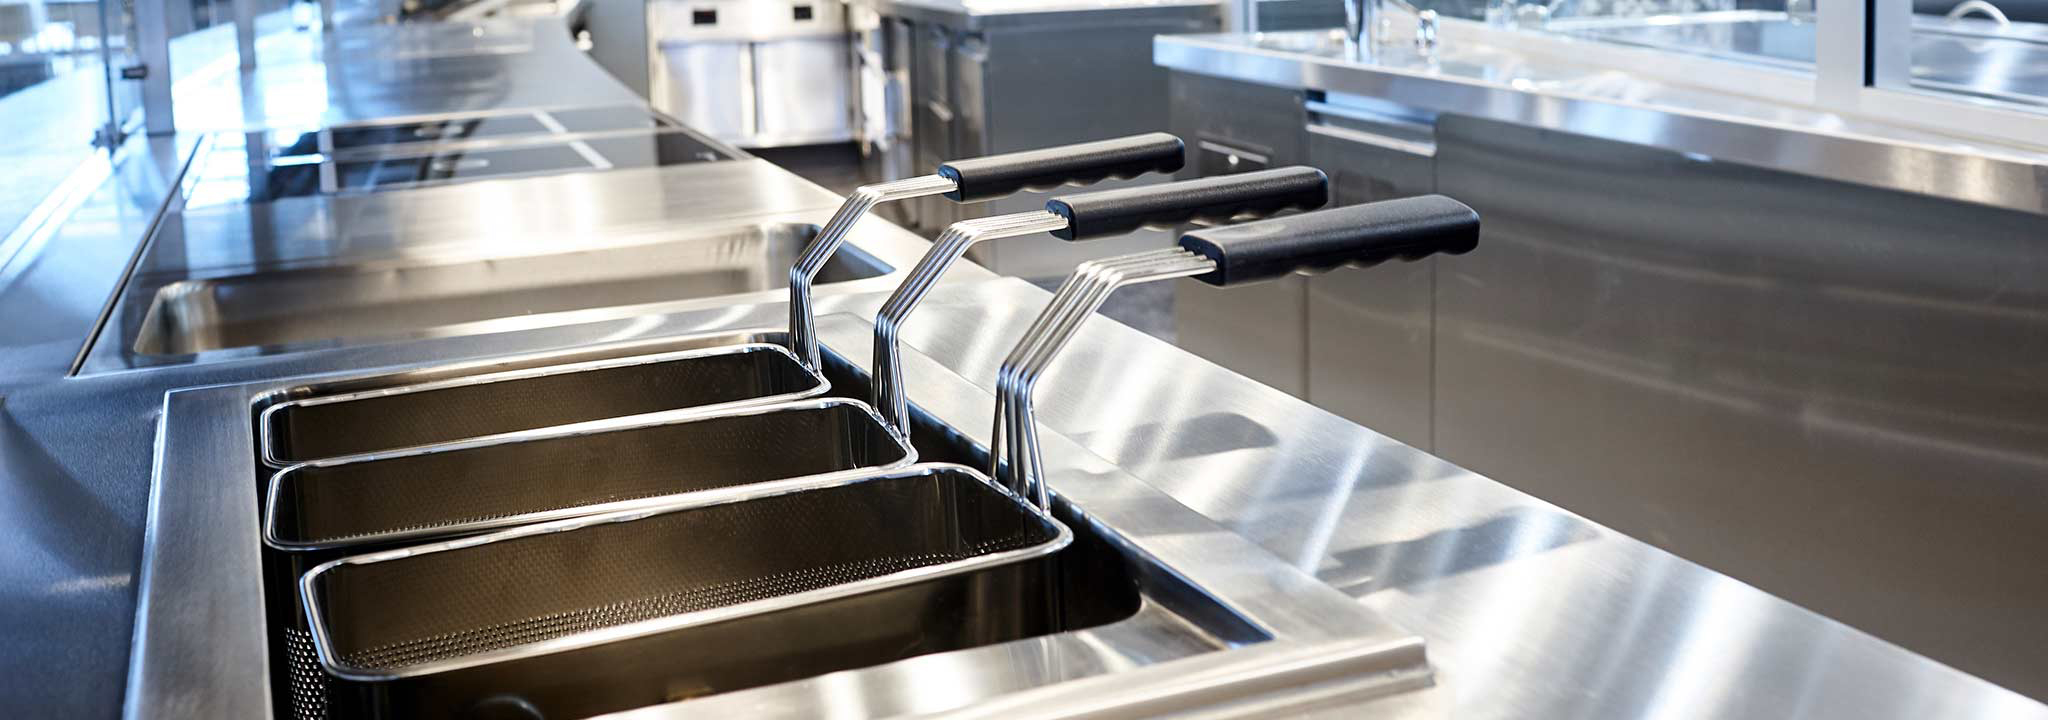 Kitchen Deep Cleaning Services in Las Vegas